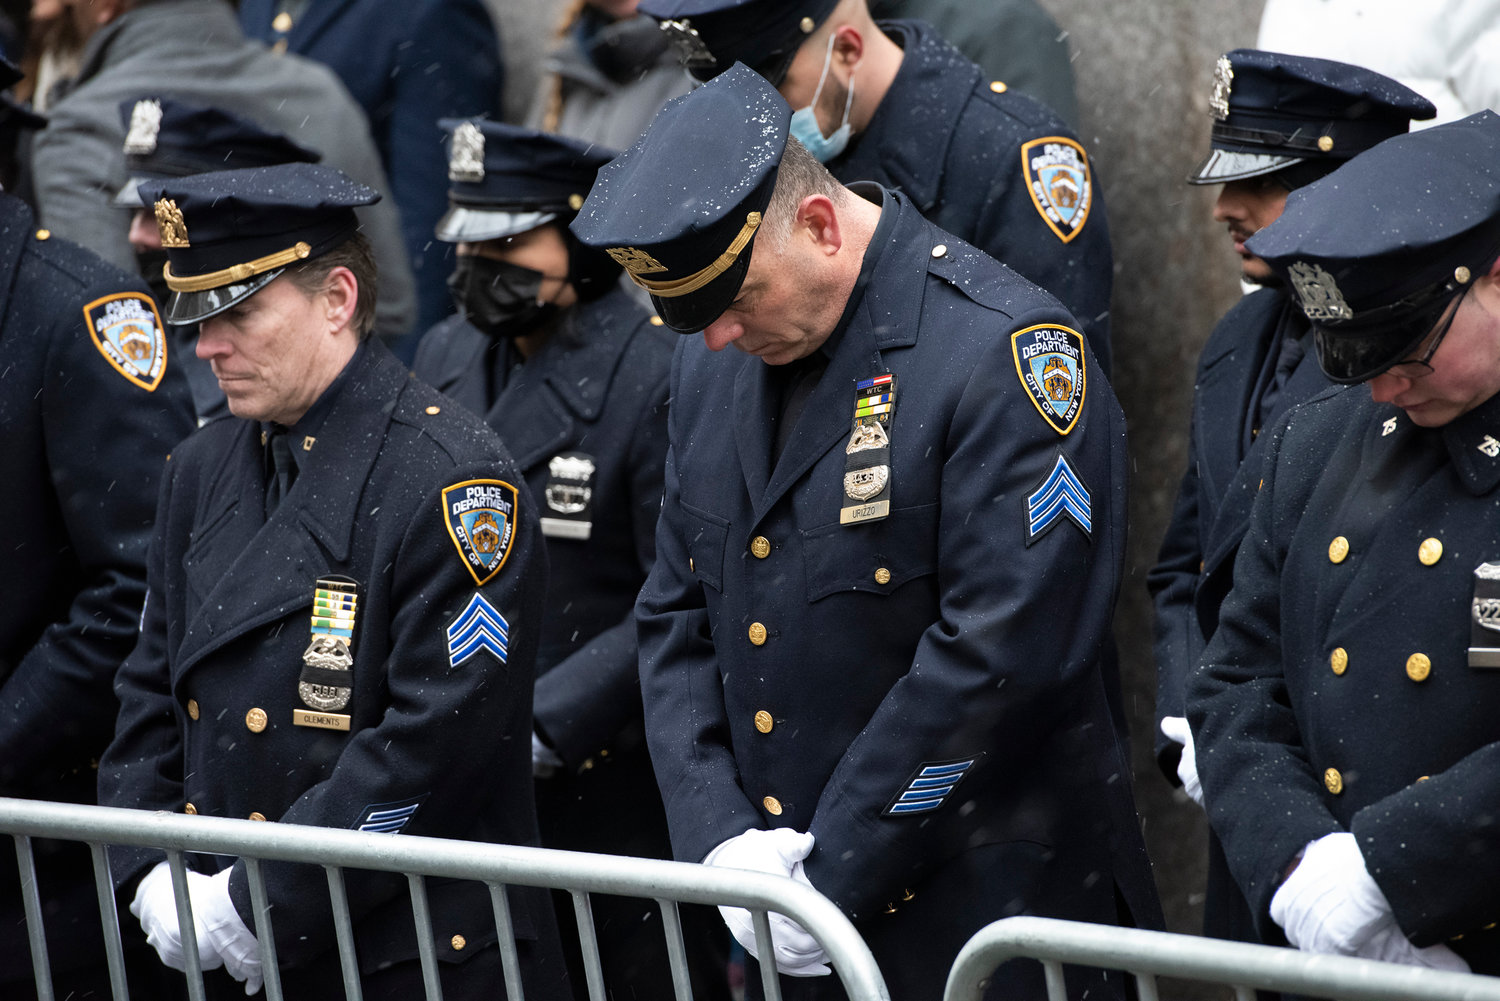 Police officers, with snowflakes on their caps and jackets, bow their heads outside St. Patrick’s Cathedral Jan. 28